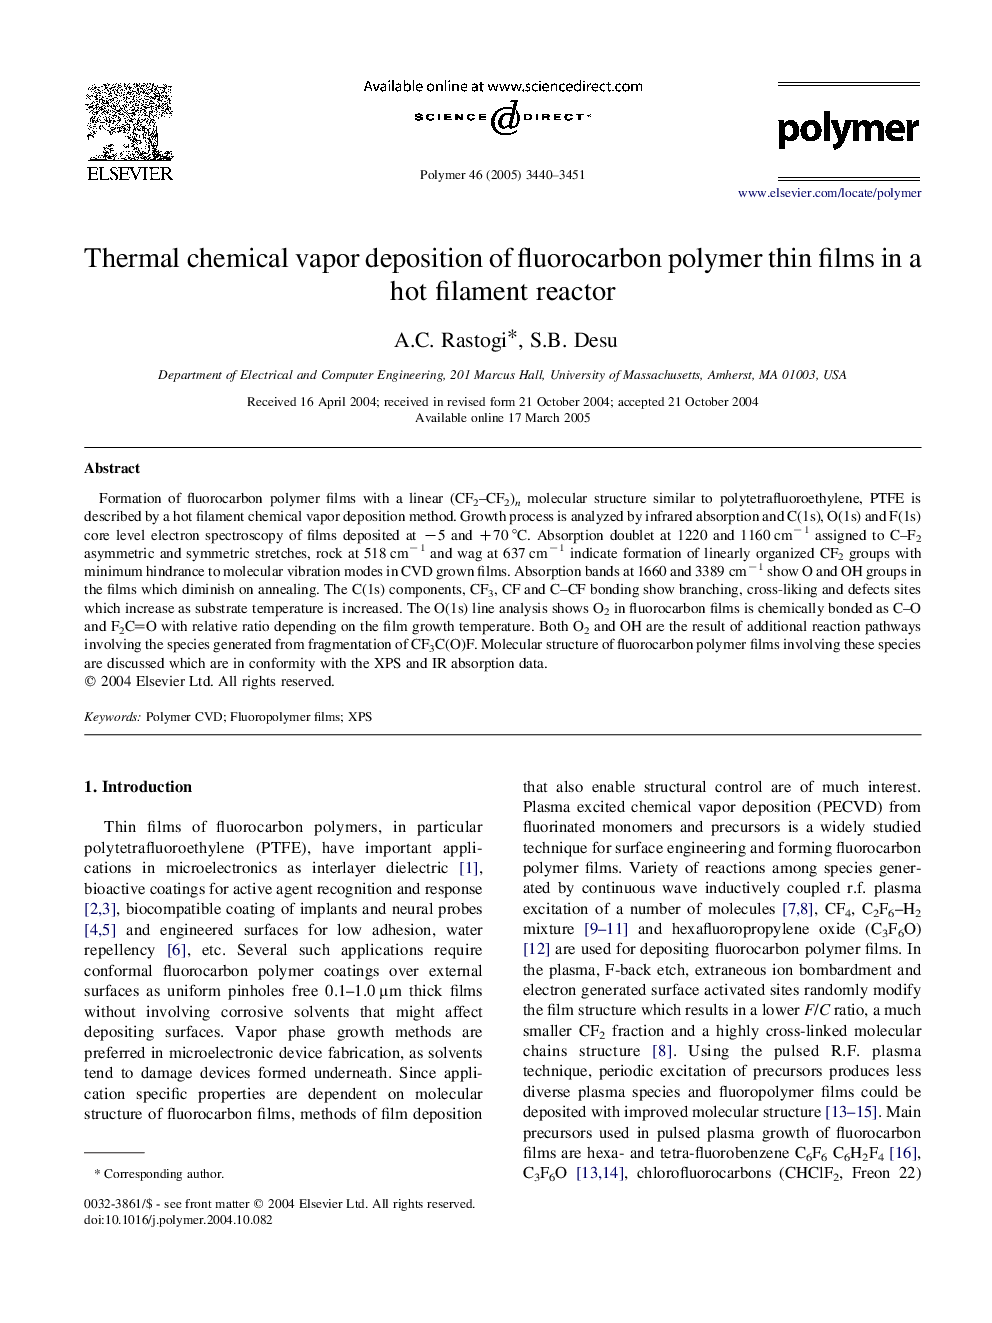 Thermal chemical vapor deposition of fluorocarbon polymer thin films in a hot filament reactor